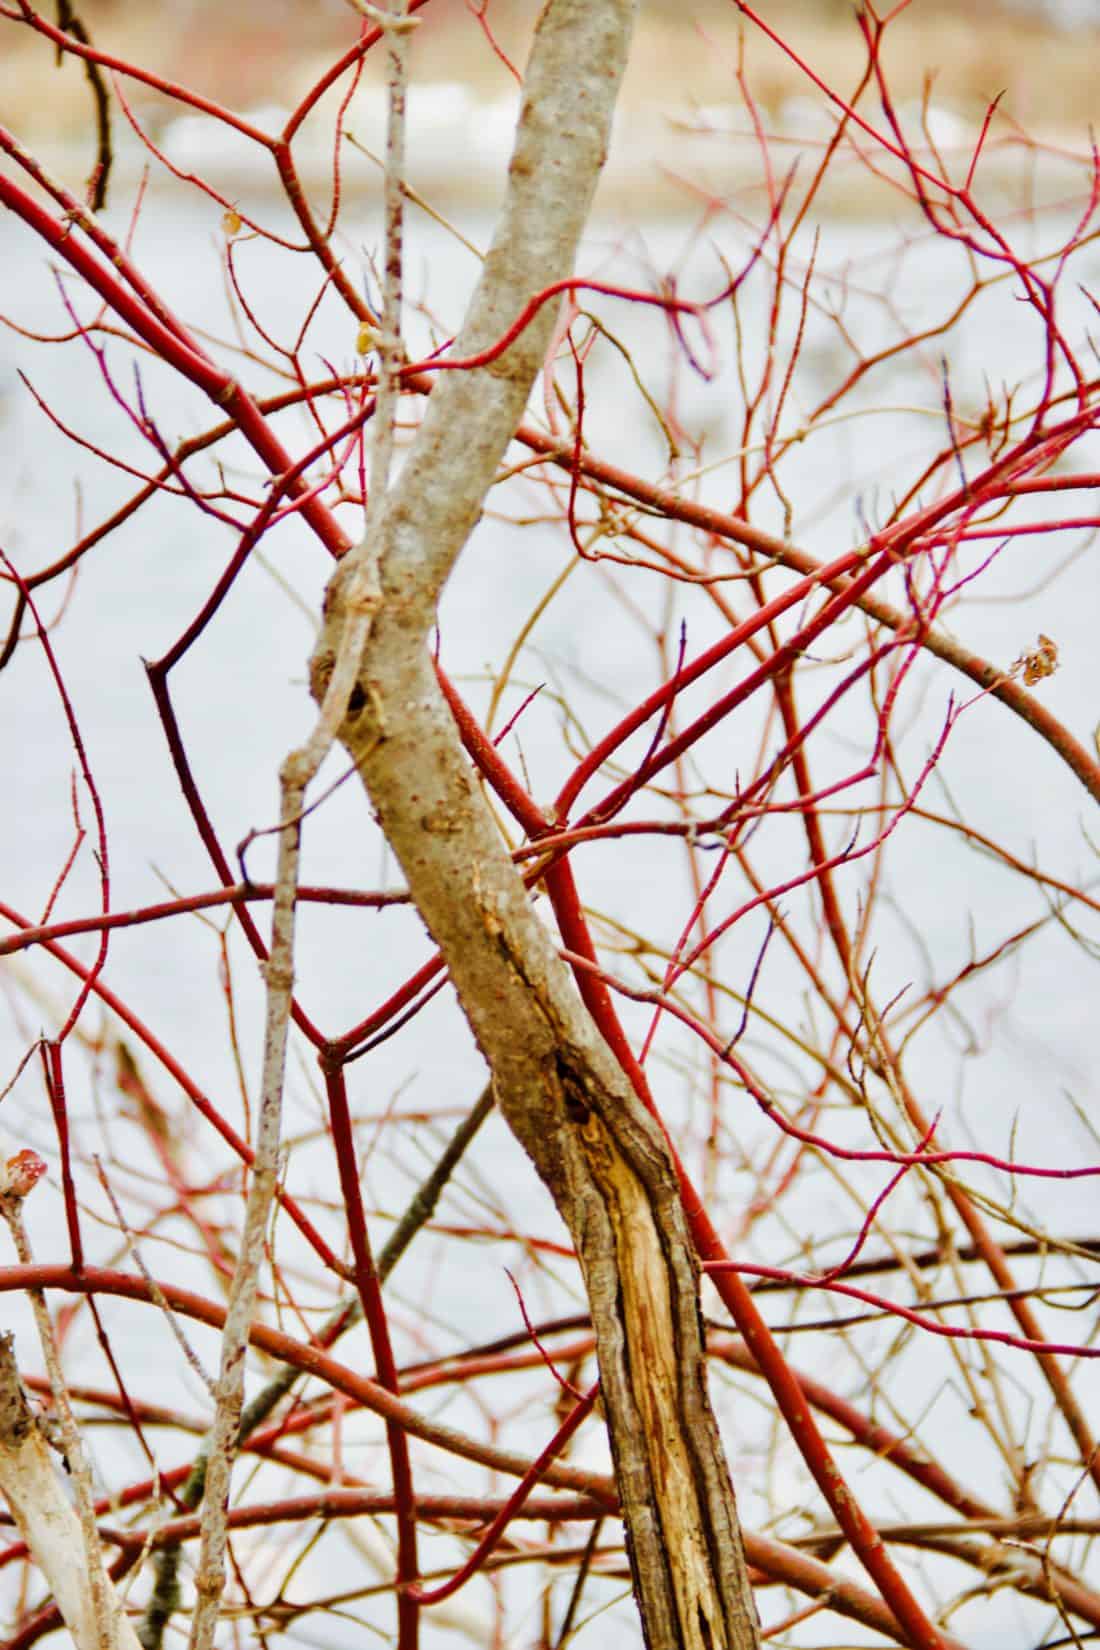 A red twig dogwood branch next to a body of water.